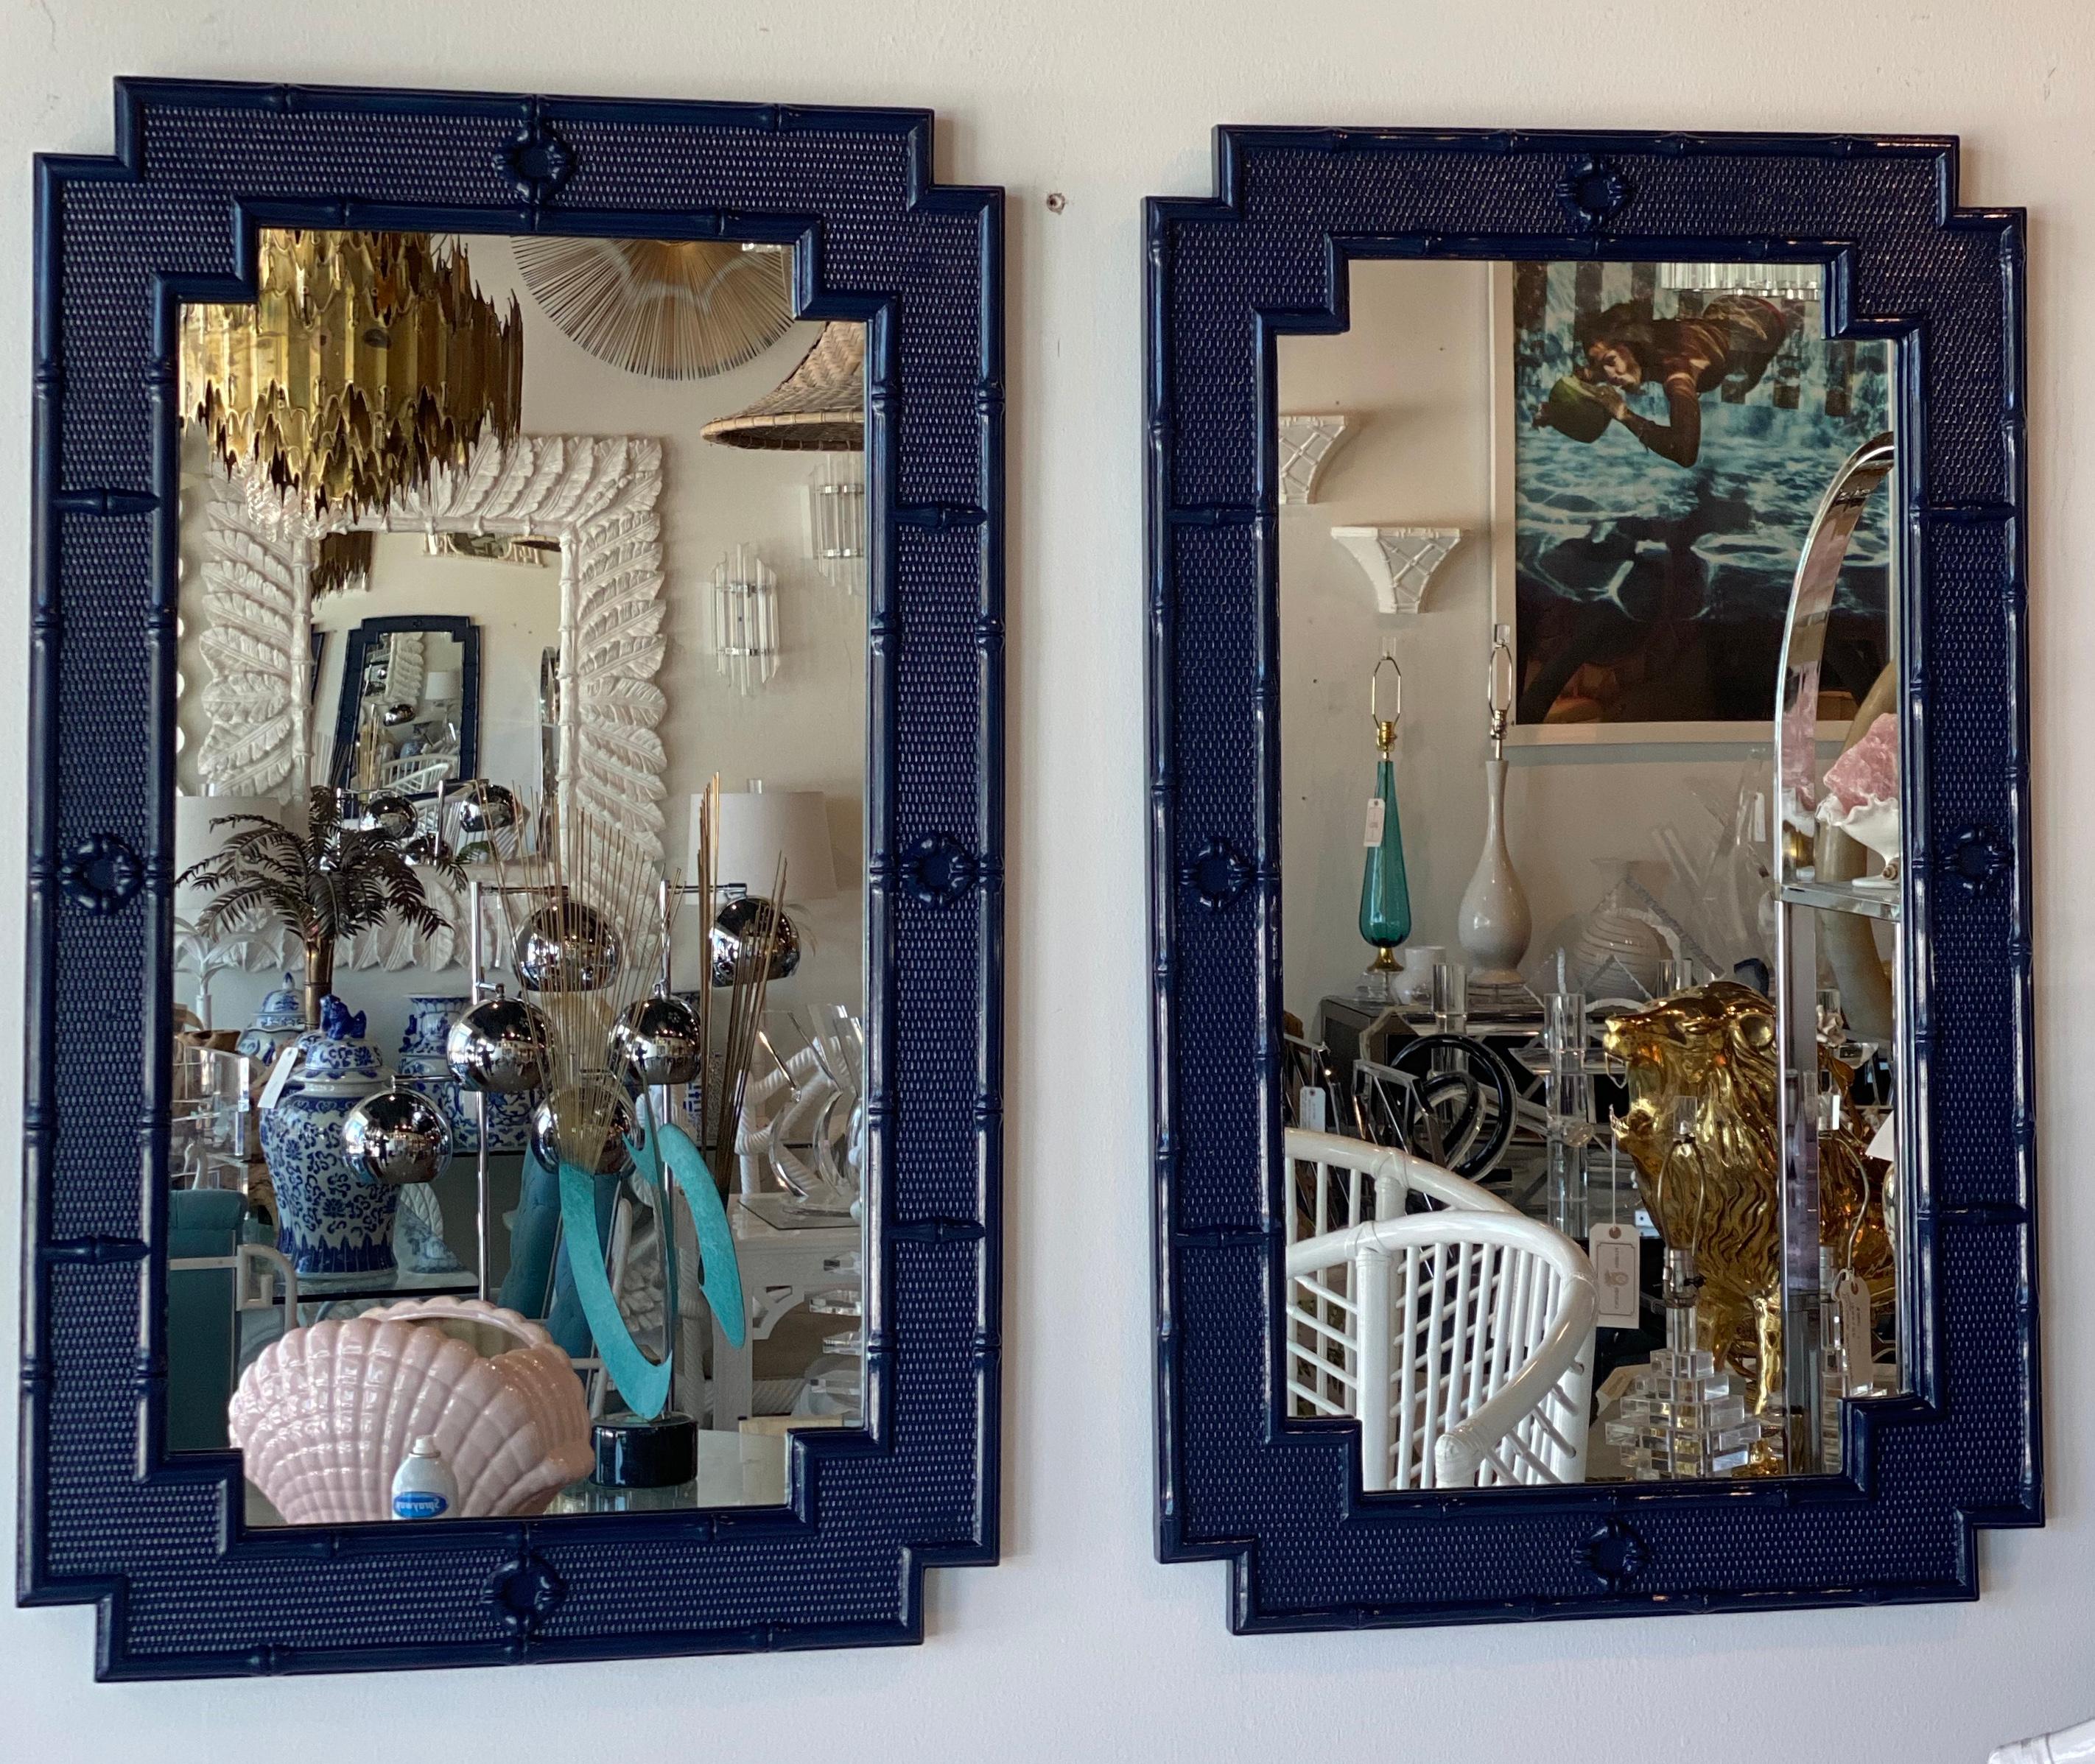 Lovely pair of vintage faux bamboo wall mirrors. They come ready to hang. Newly lacquered in a navy blue gloss. I have a single if needed instead of a pair.